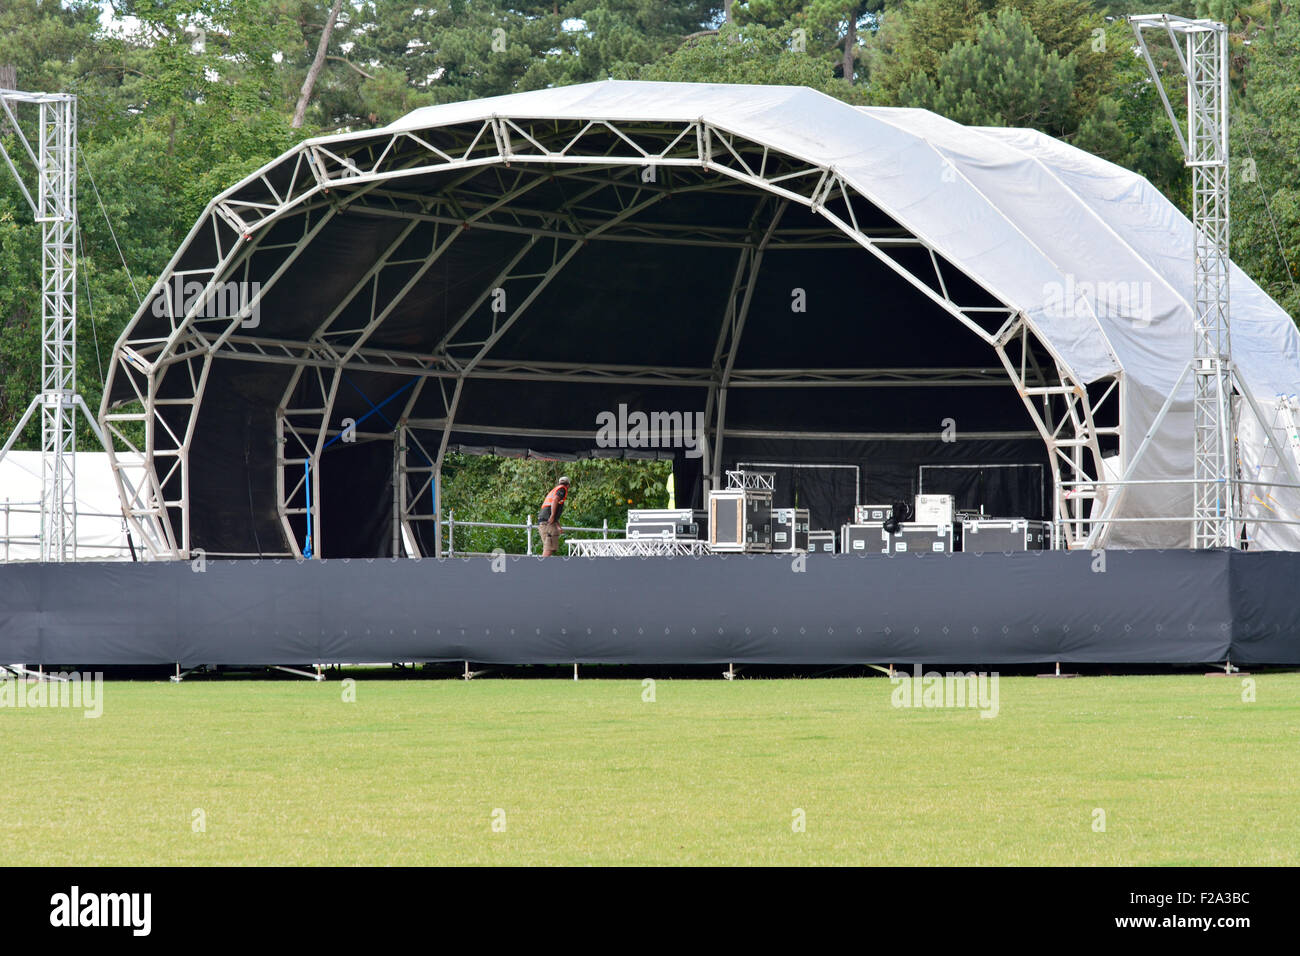 Main stage being constructed for Proms in the Park in Bedford, Bedfordshire, England Stock Photo